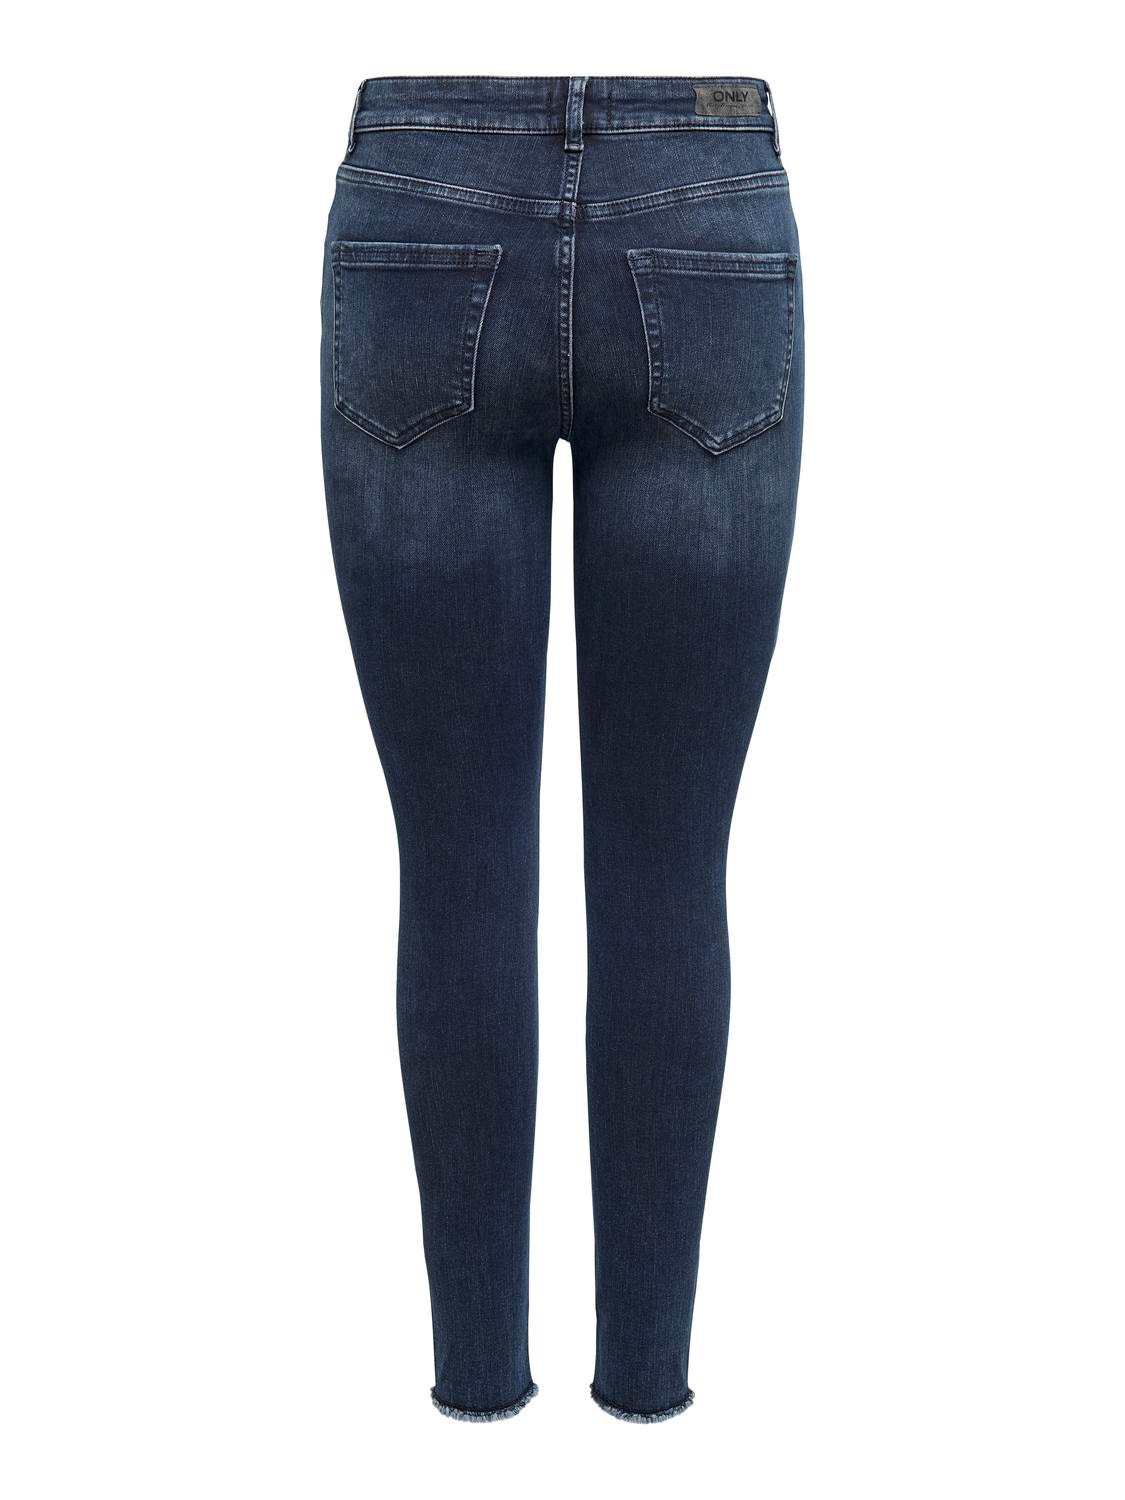 ONLY Jeans Skinny Fit Taille moyenne Ourlet brut -Blue Black Denim - 15209618